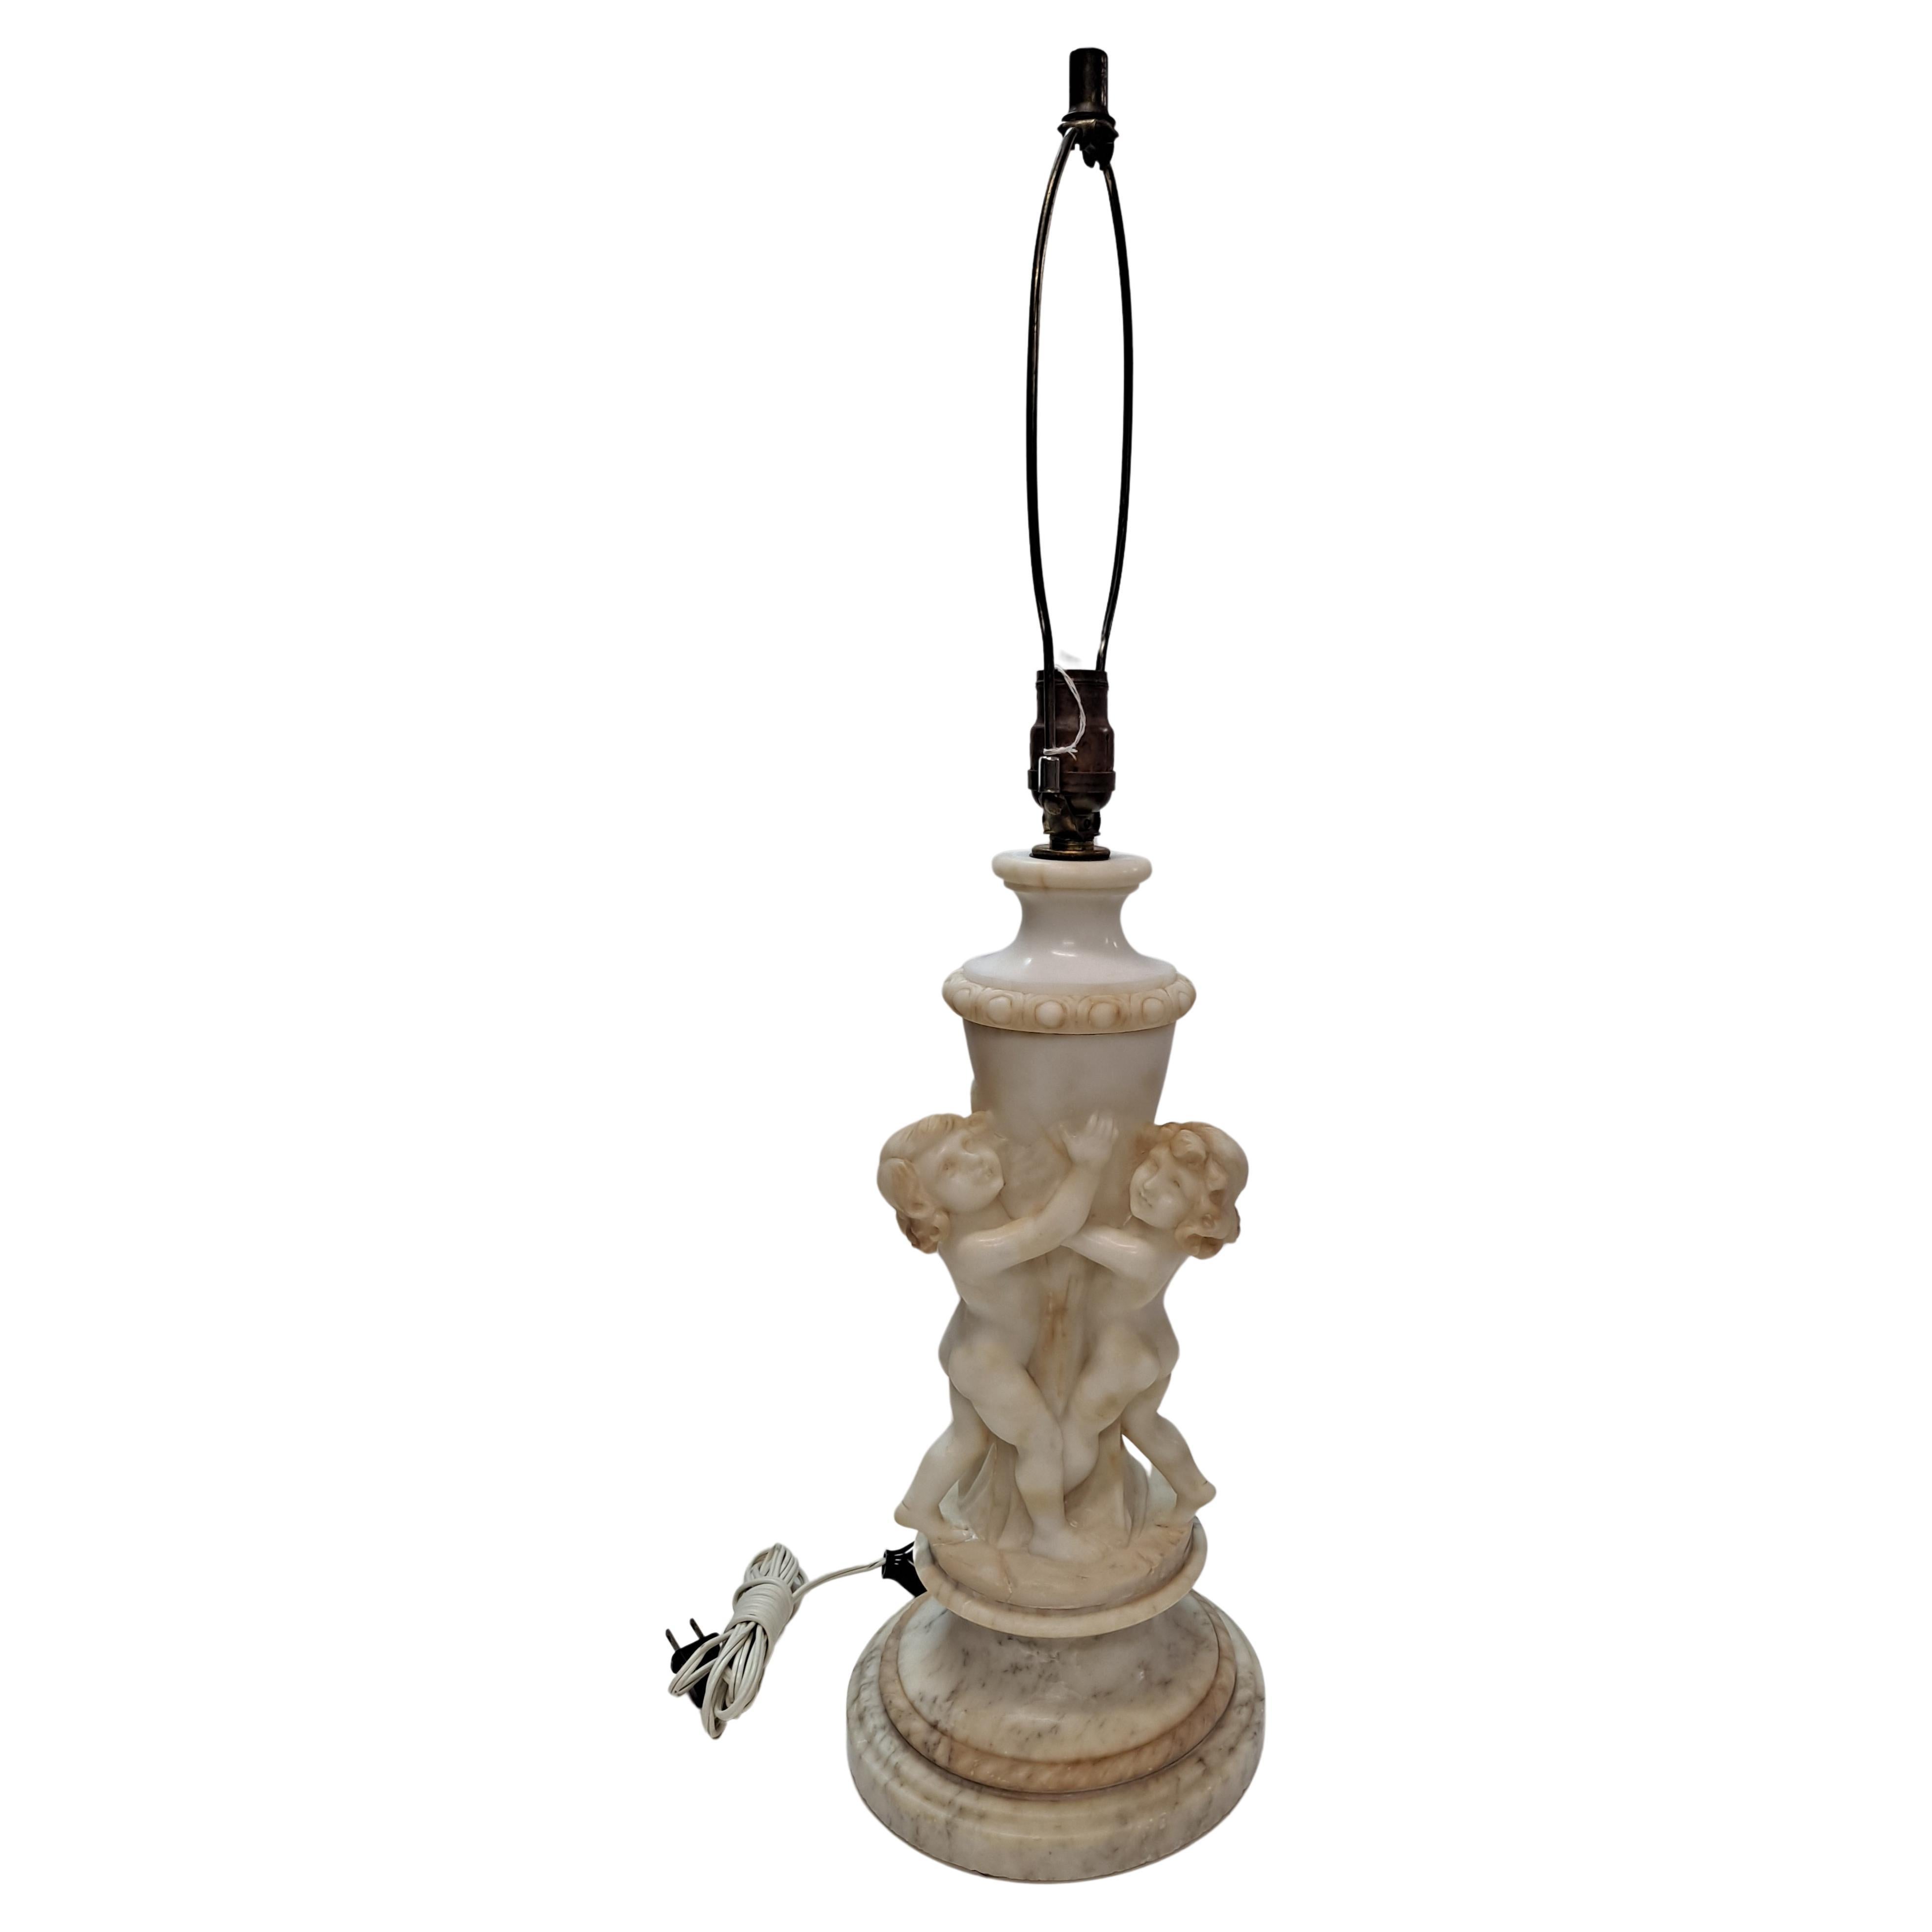 19th century Italian Carved Alabaster Sculpture Lamp with Marble Base  For Sale